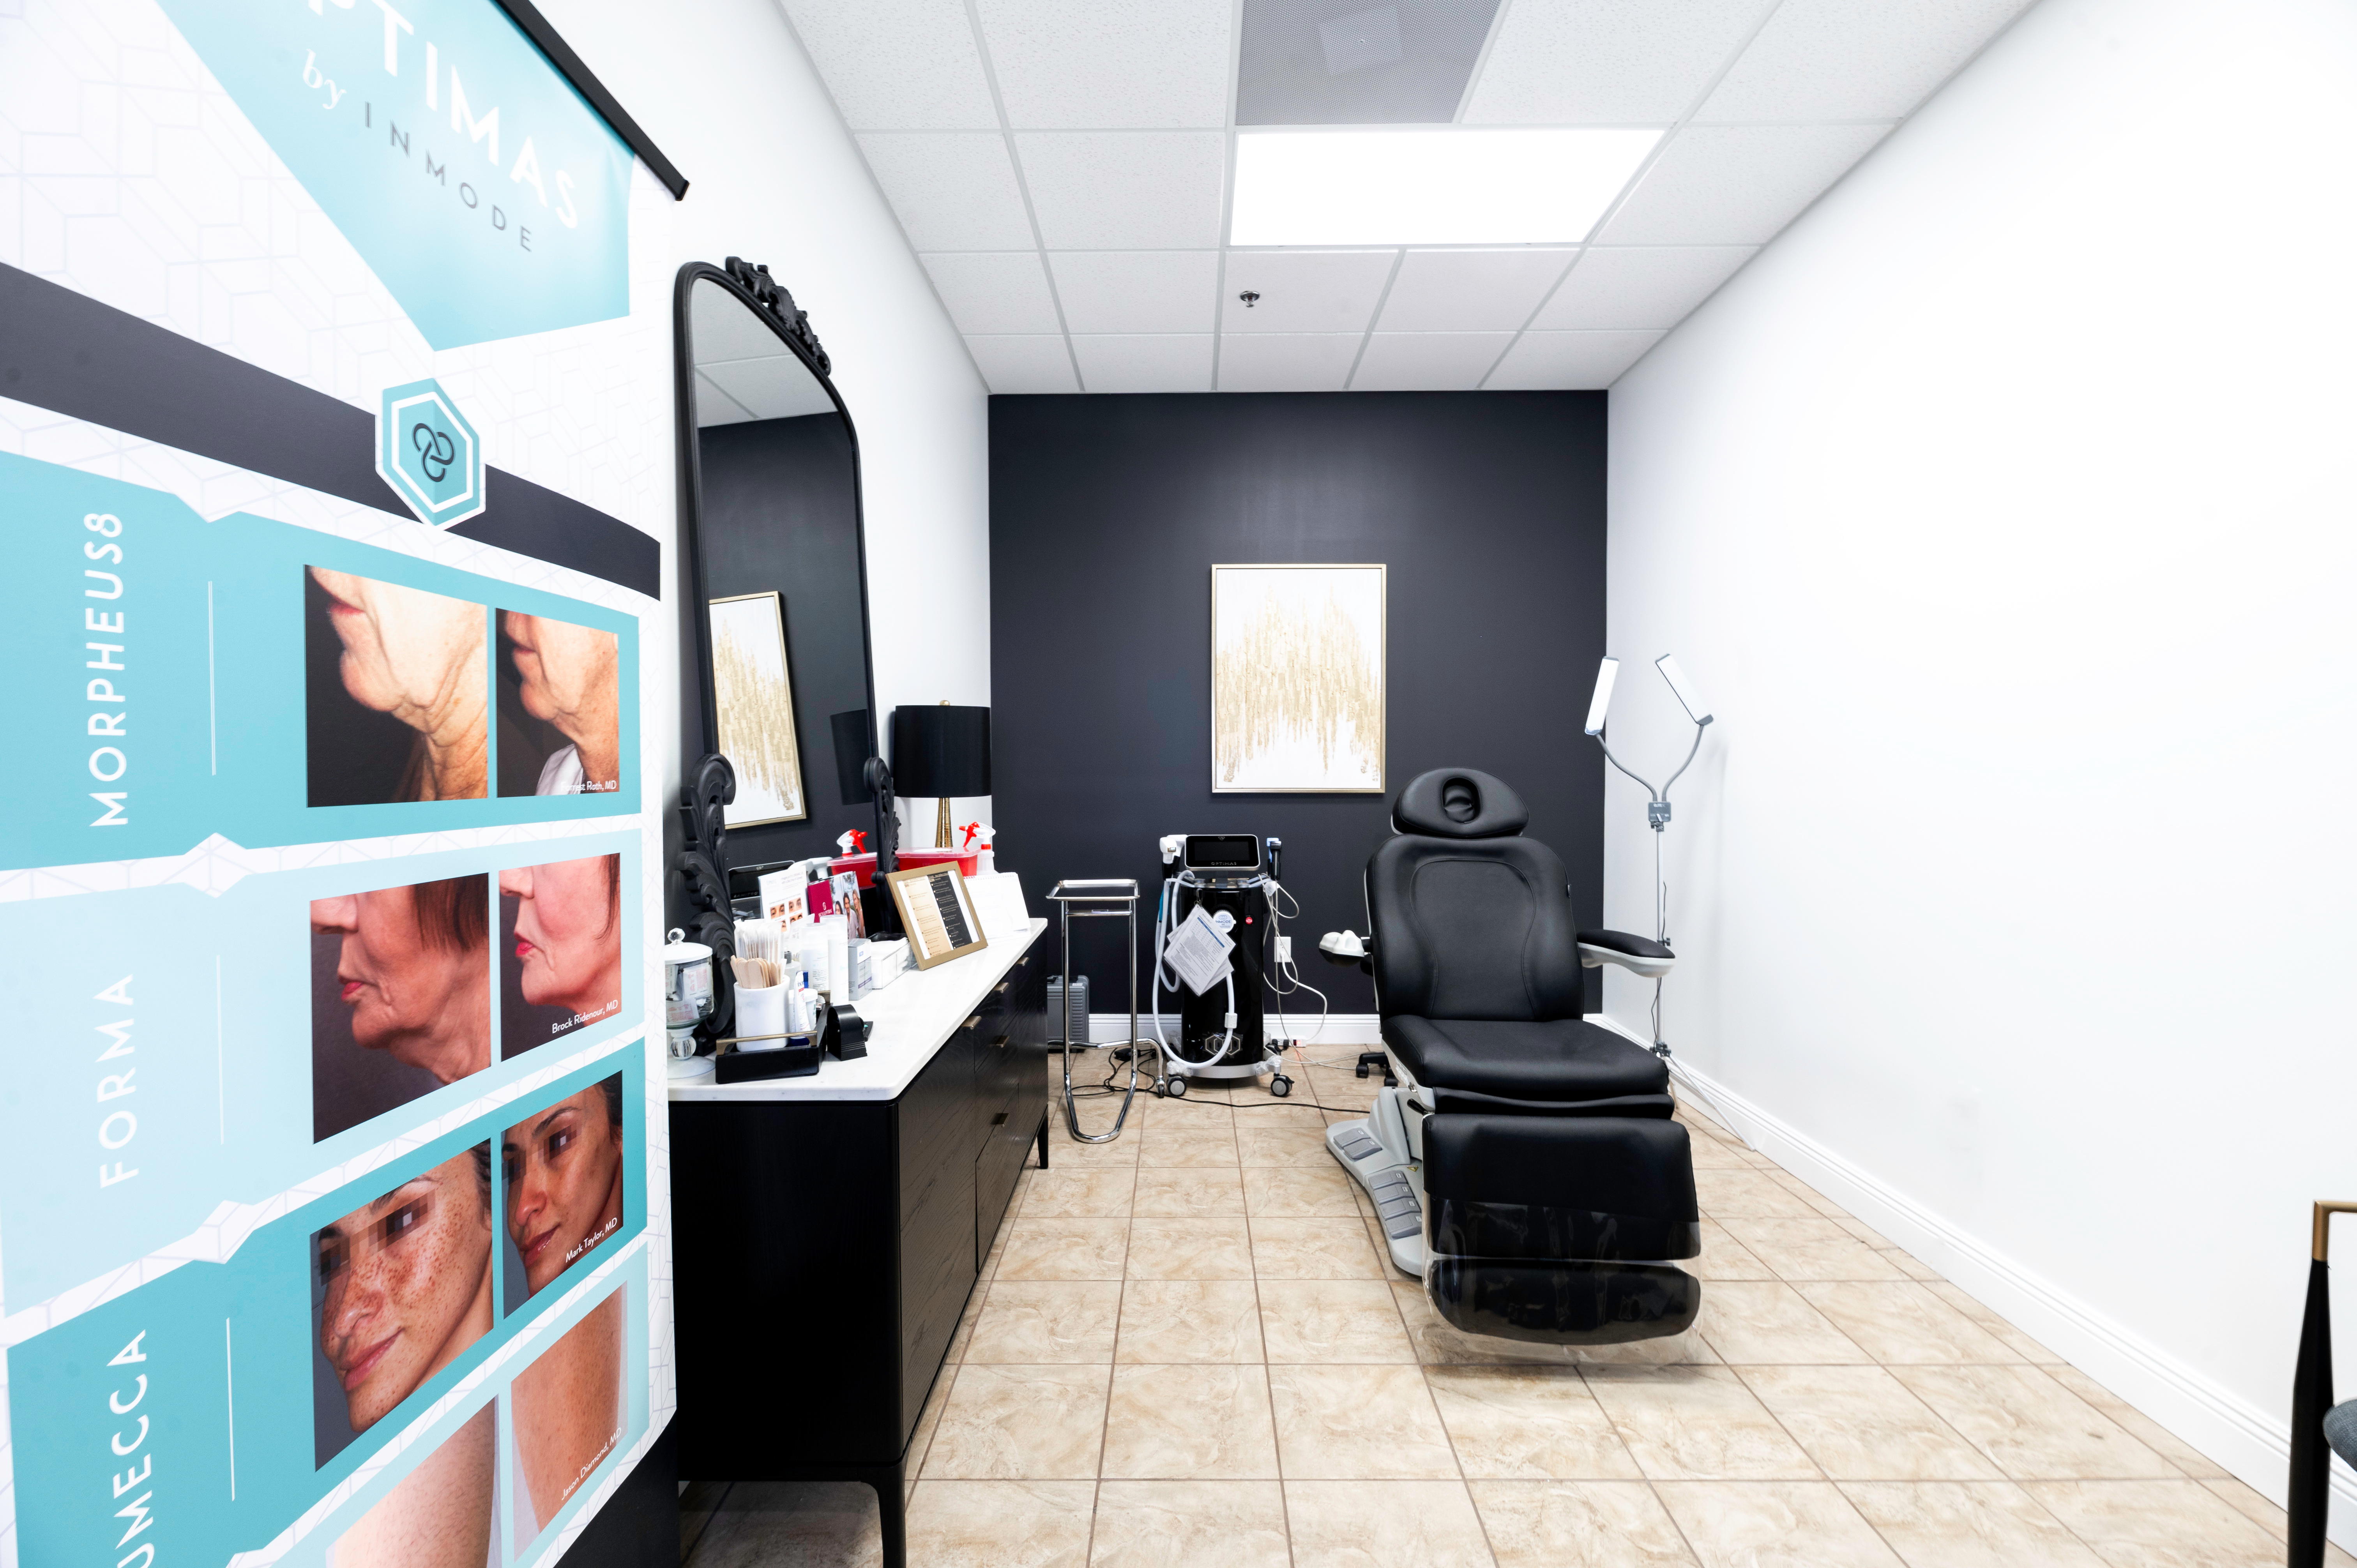 AT GLAM + GLO MEDICAL AESTHETICS LOUNGE, OUR MISSION IS TO EDUCATE AND EMPOWER CLIENTS TO LOOK AND FEEL BOTH BEAUTIFUL AND YOUTHFUL.